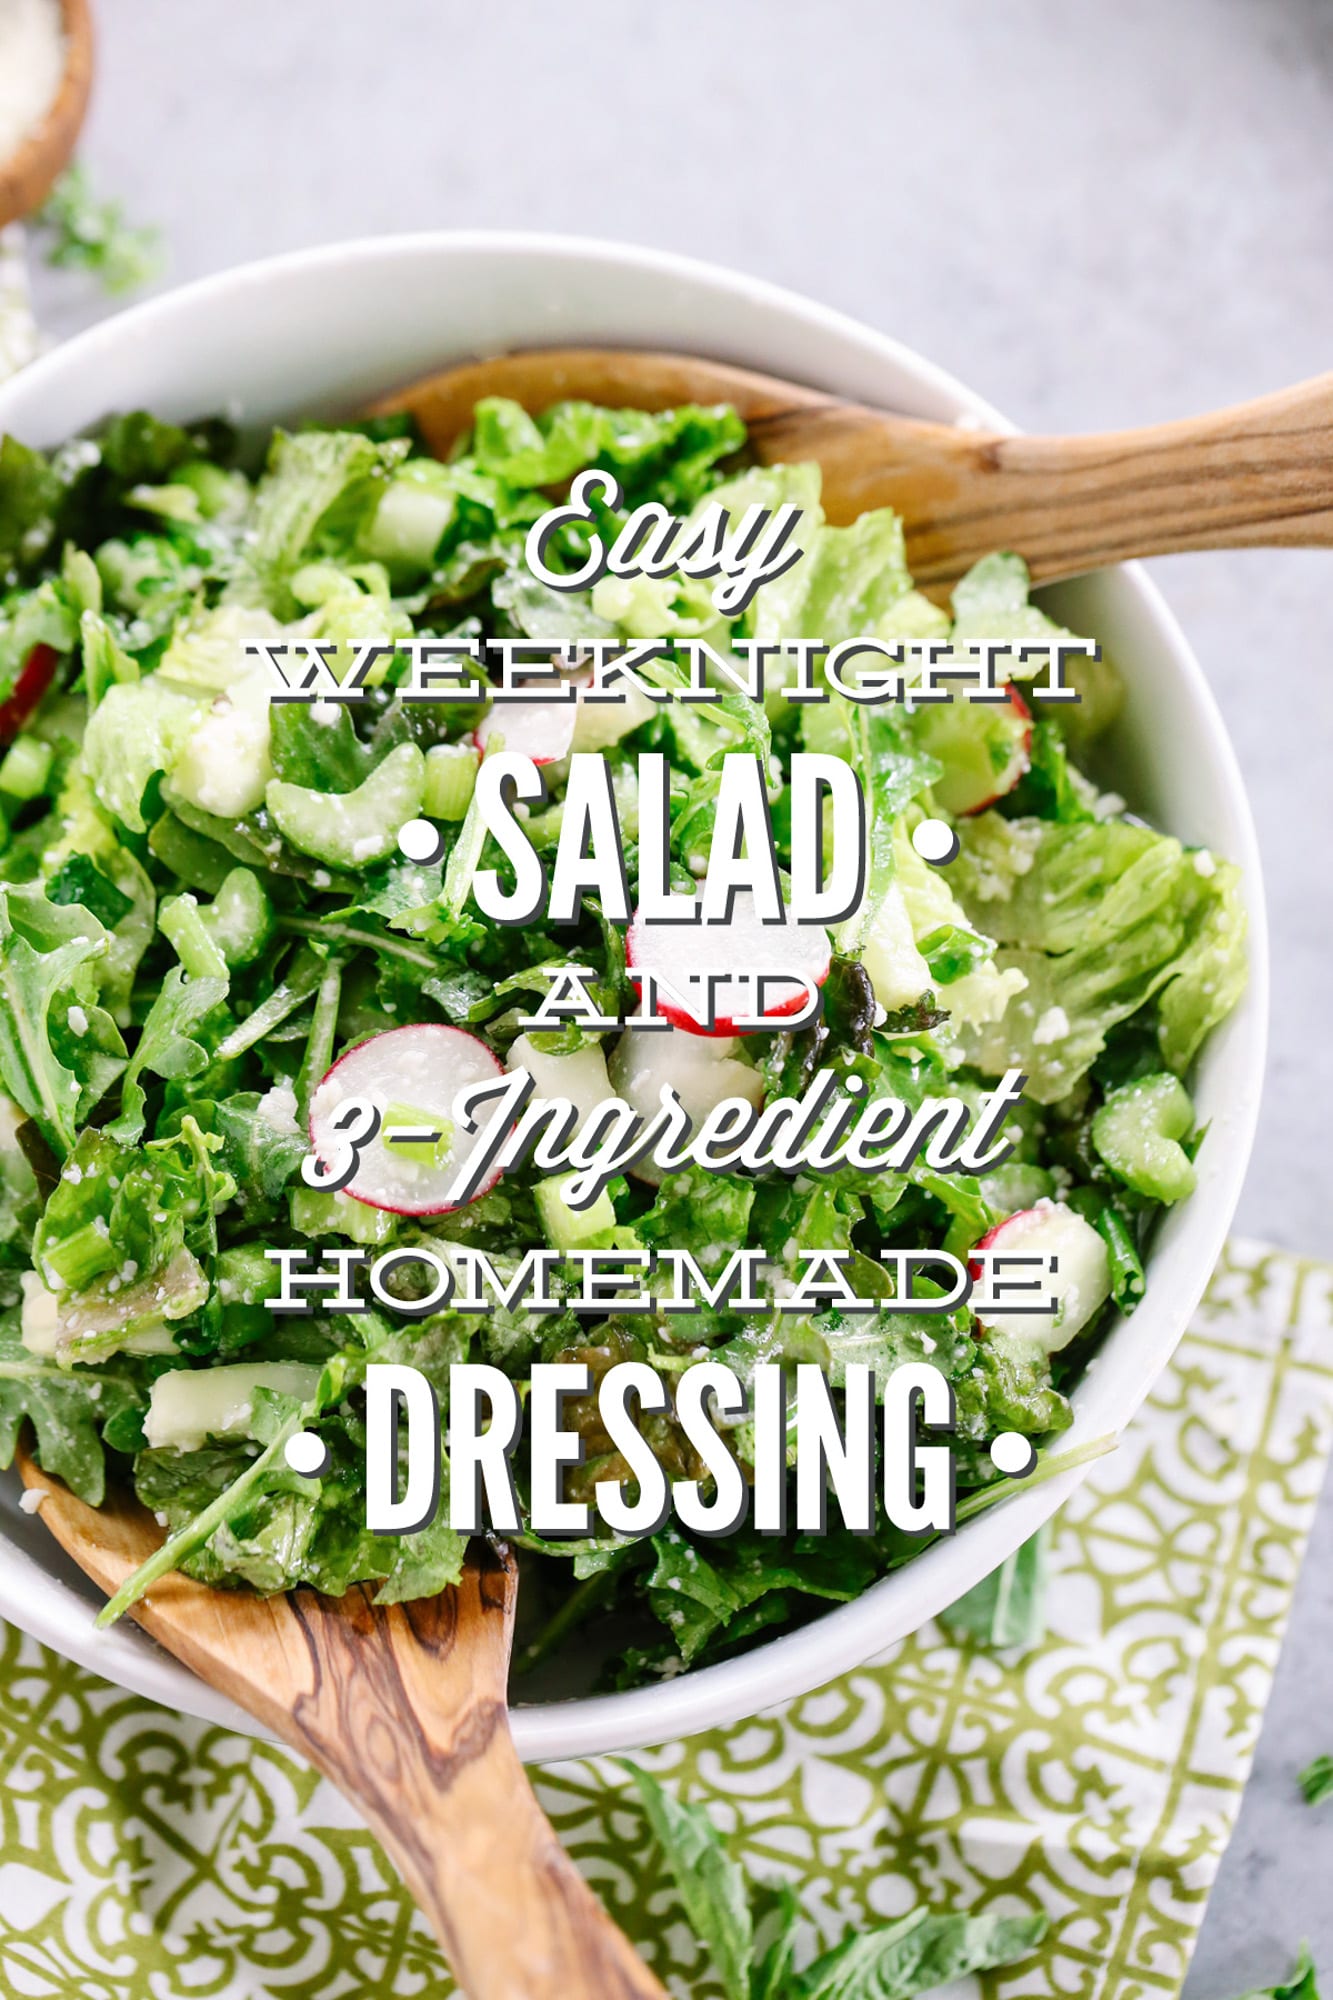 Easy Weeknight Salad and 3-Ingredient Homemade Dressing